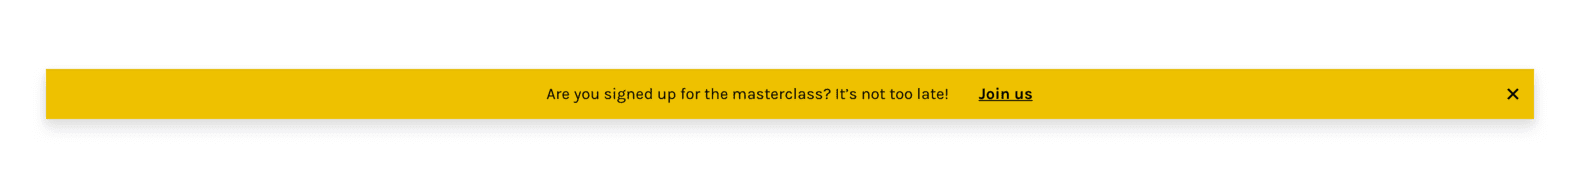 Alert bar: Are you signed up for the masterclass? It's not too late! Join us!